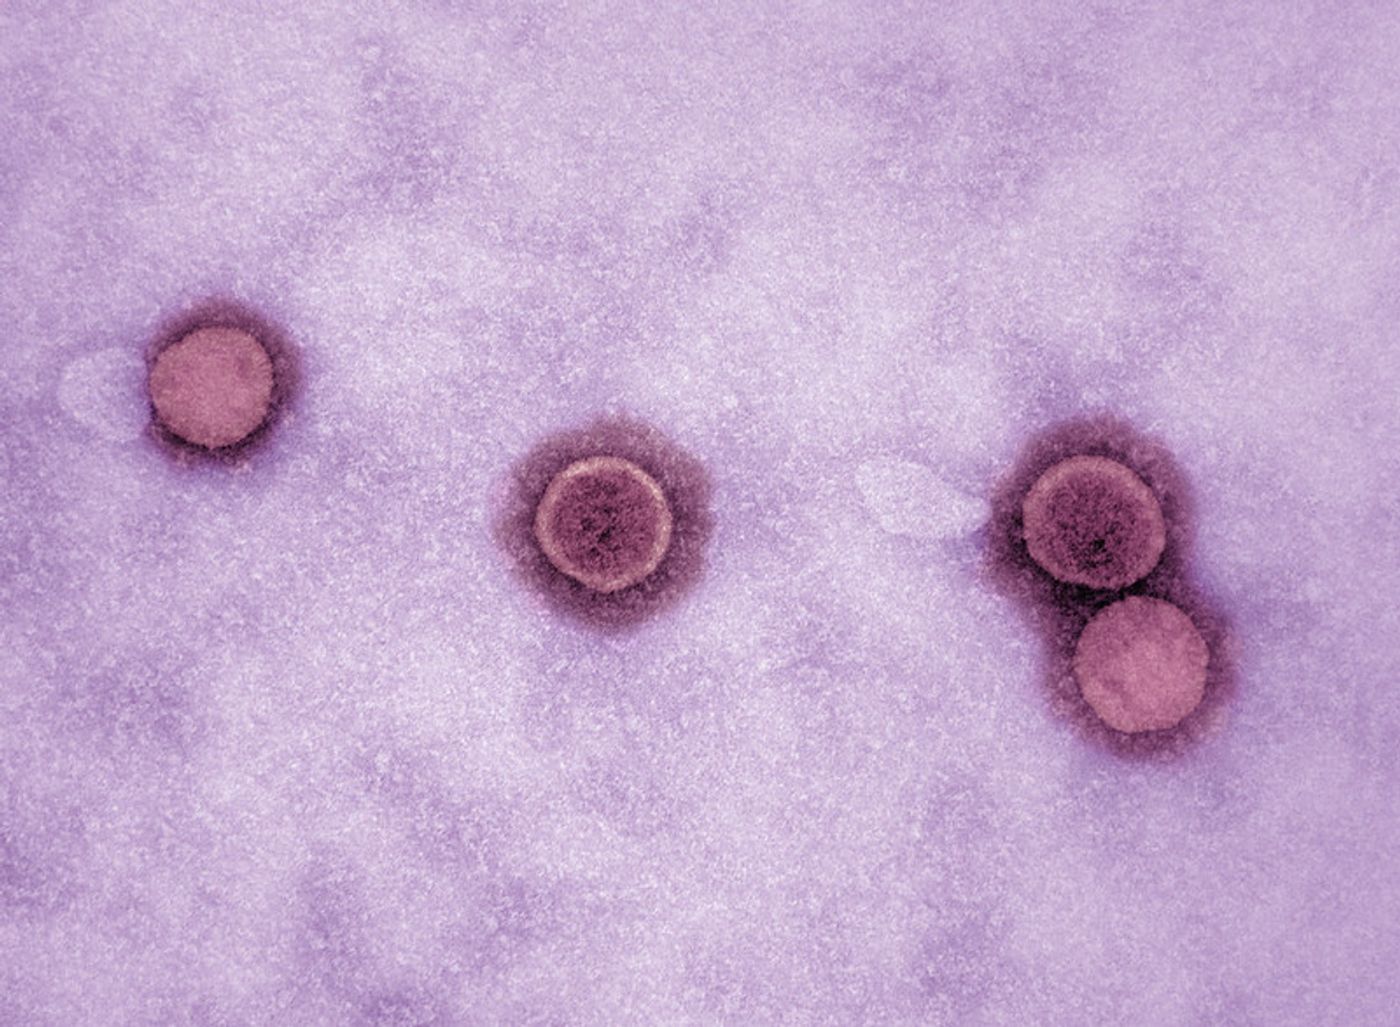 Colorized transmission electron micrograph of SARS-CoV-2 virus particles (pink), isolated from a patient. Image captured at the NIAID Integrated Research Facility (IRF) in Fort Detrick, Maryland. Credit: NIAID